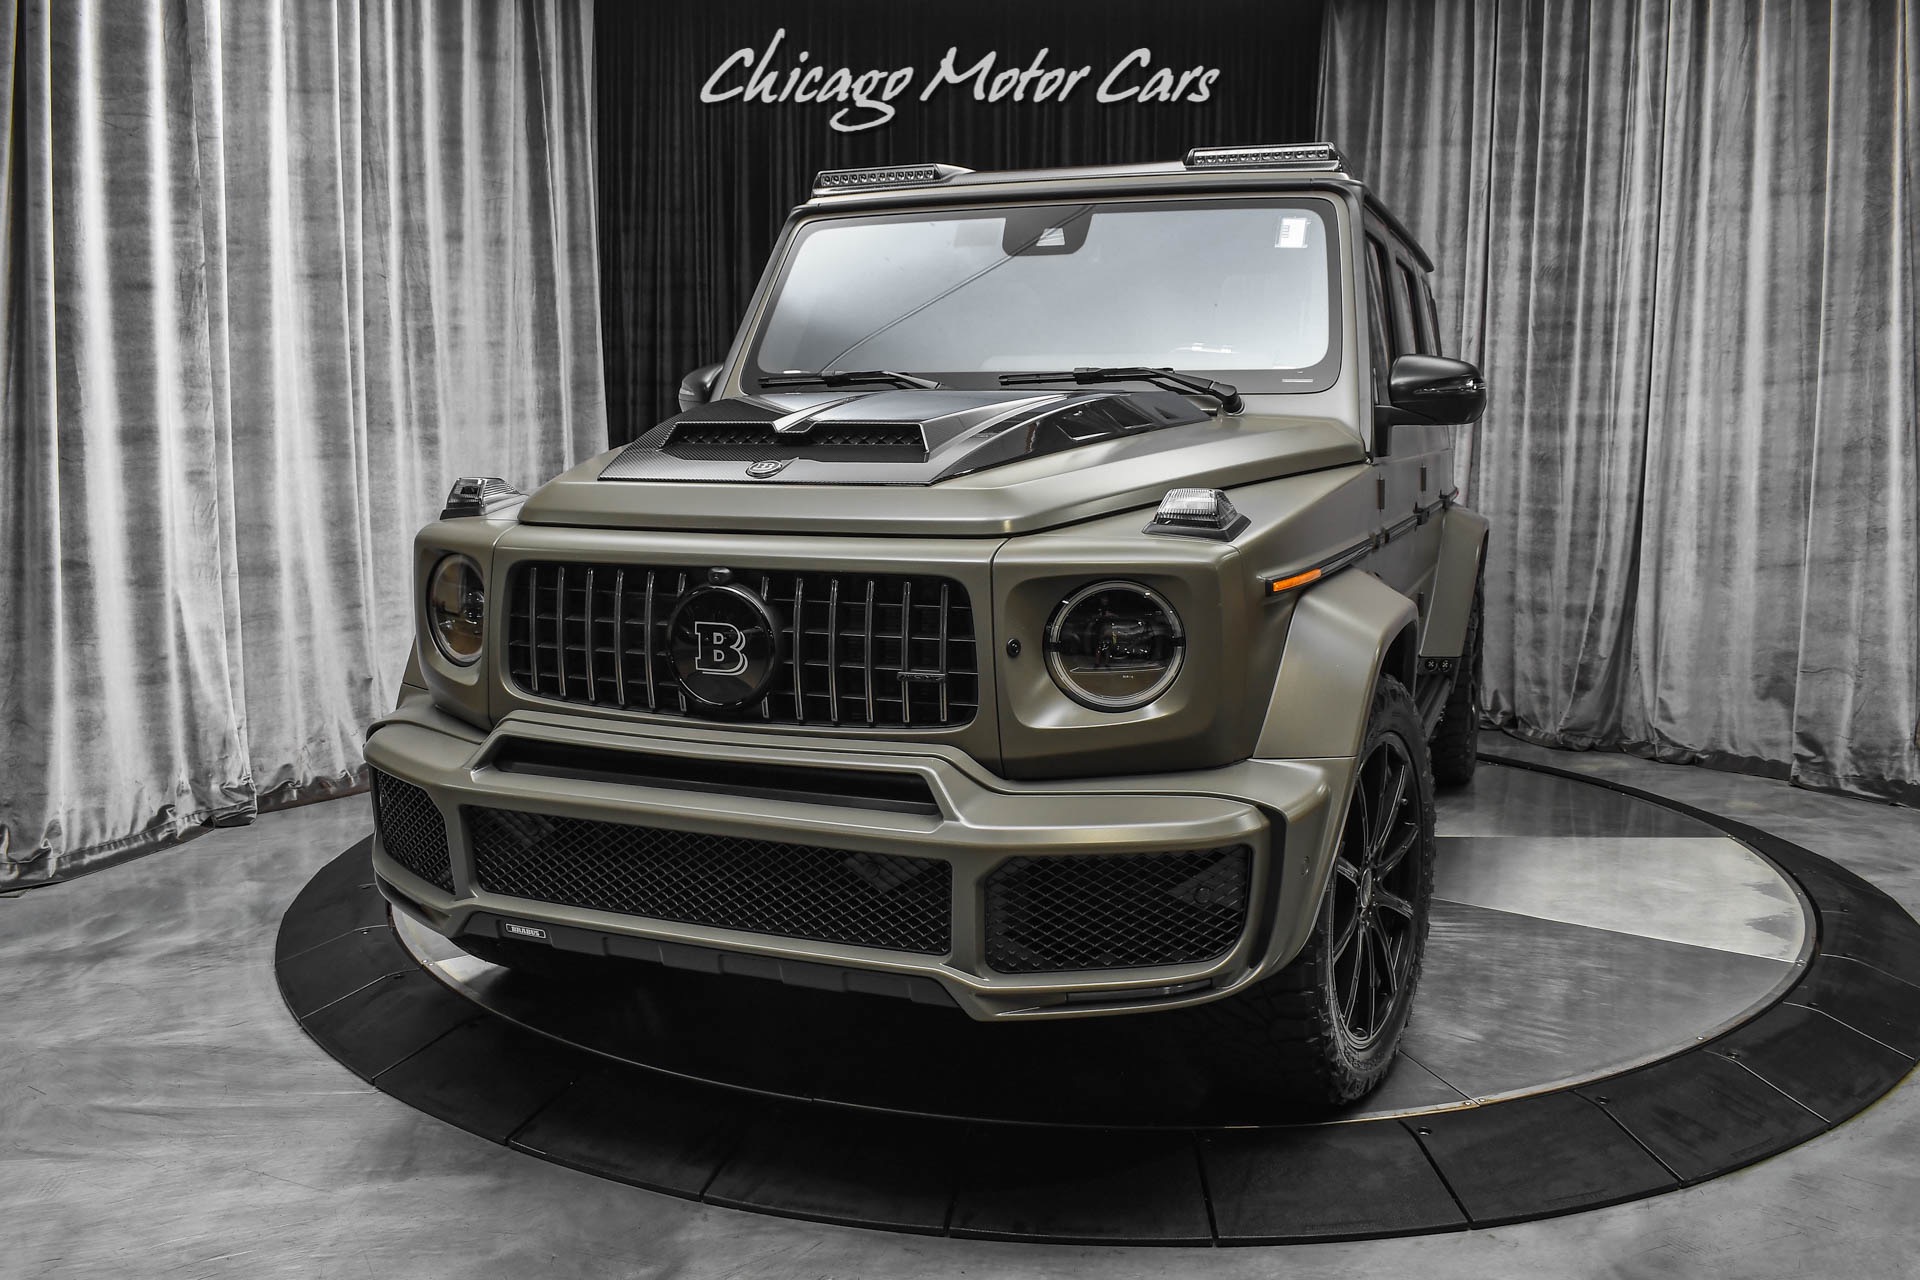 Used-2021-Mercedes-Benz-G63-AMG-SUV-Matte-Olive-Green-Brabus-Package-CARBON-FIBER-Only-2800-Miles